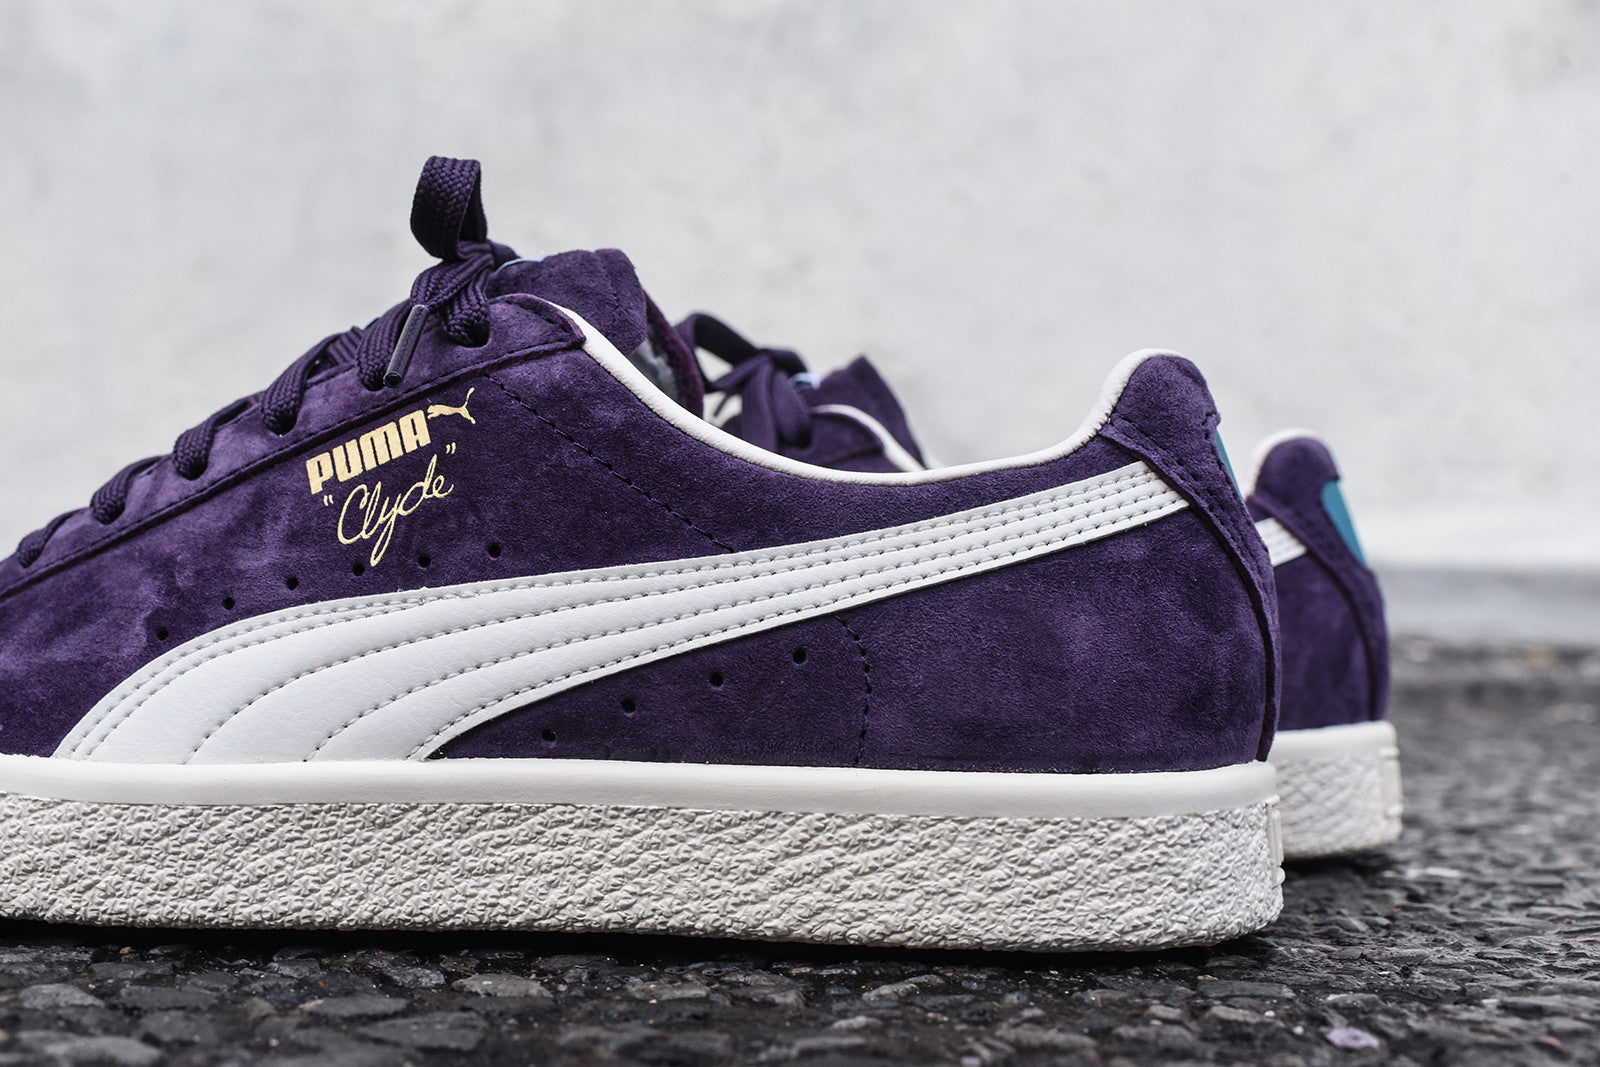 Puma Clyde Select Premium Pack – Kith